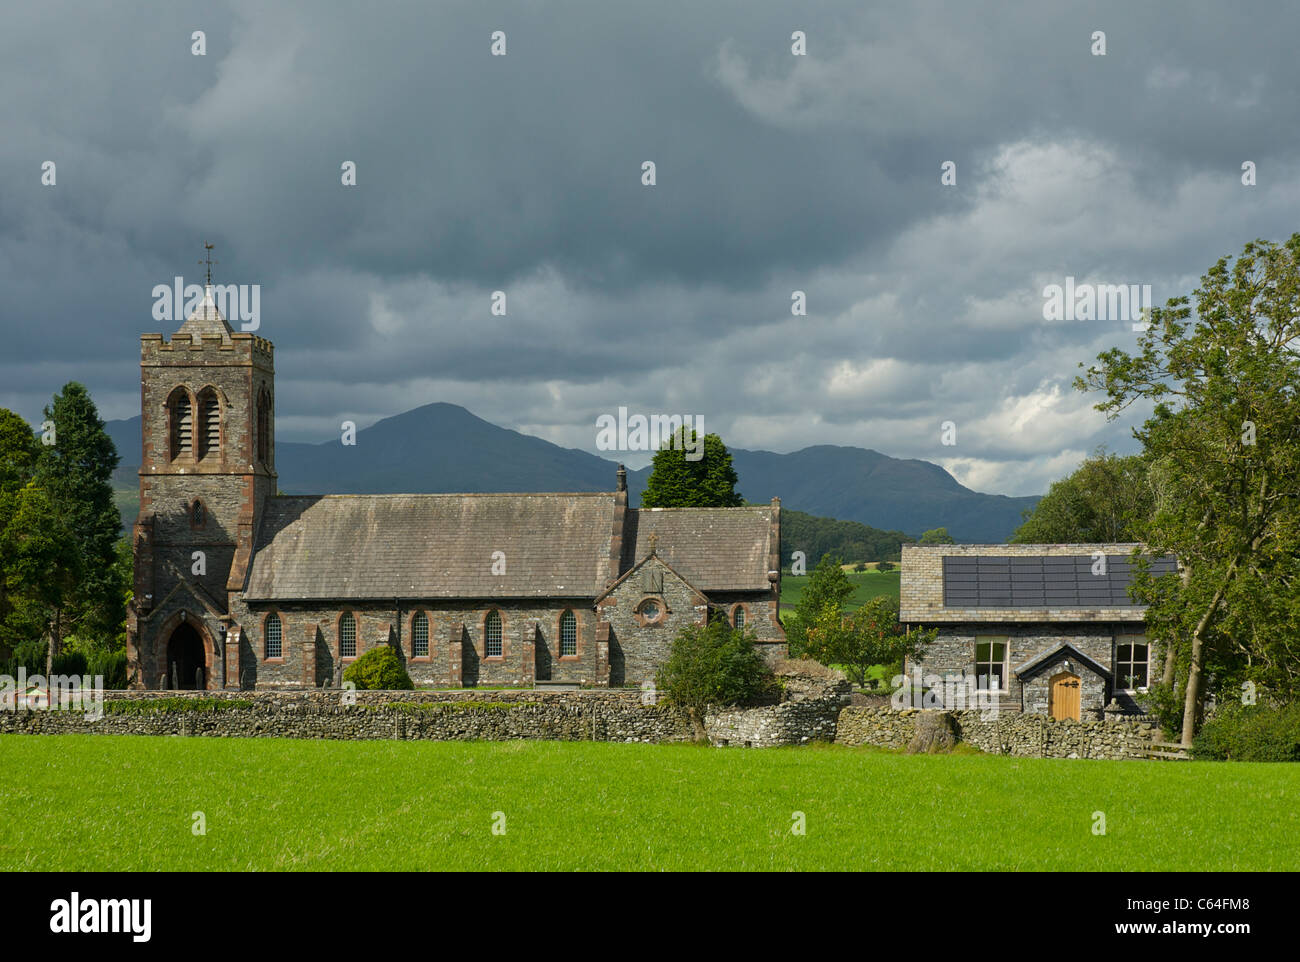 St Luke's Church, Lowick, Lake District National Park, Cumbria, England UK, with village hall fitted with solar panels Stock Photo